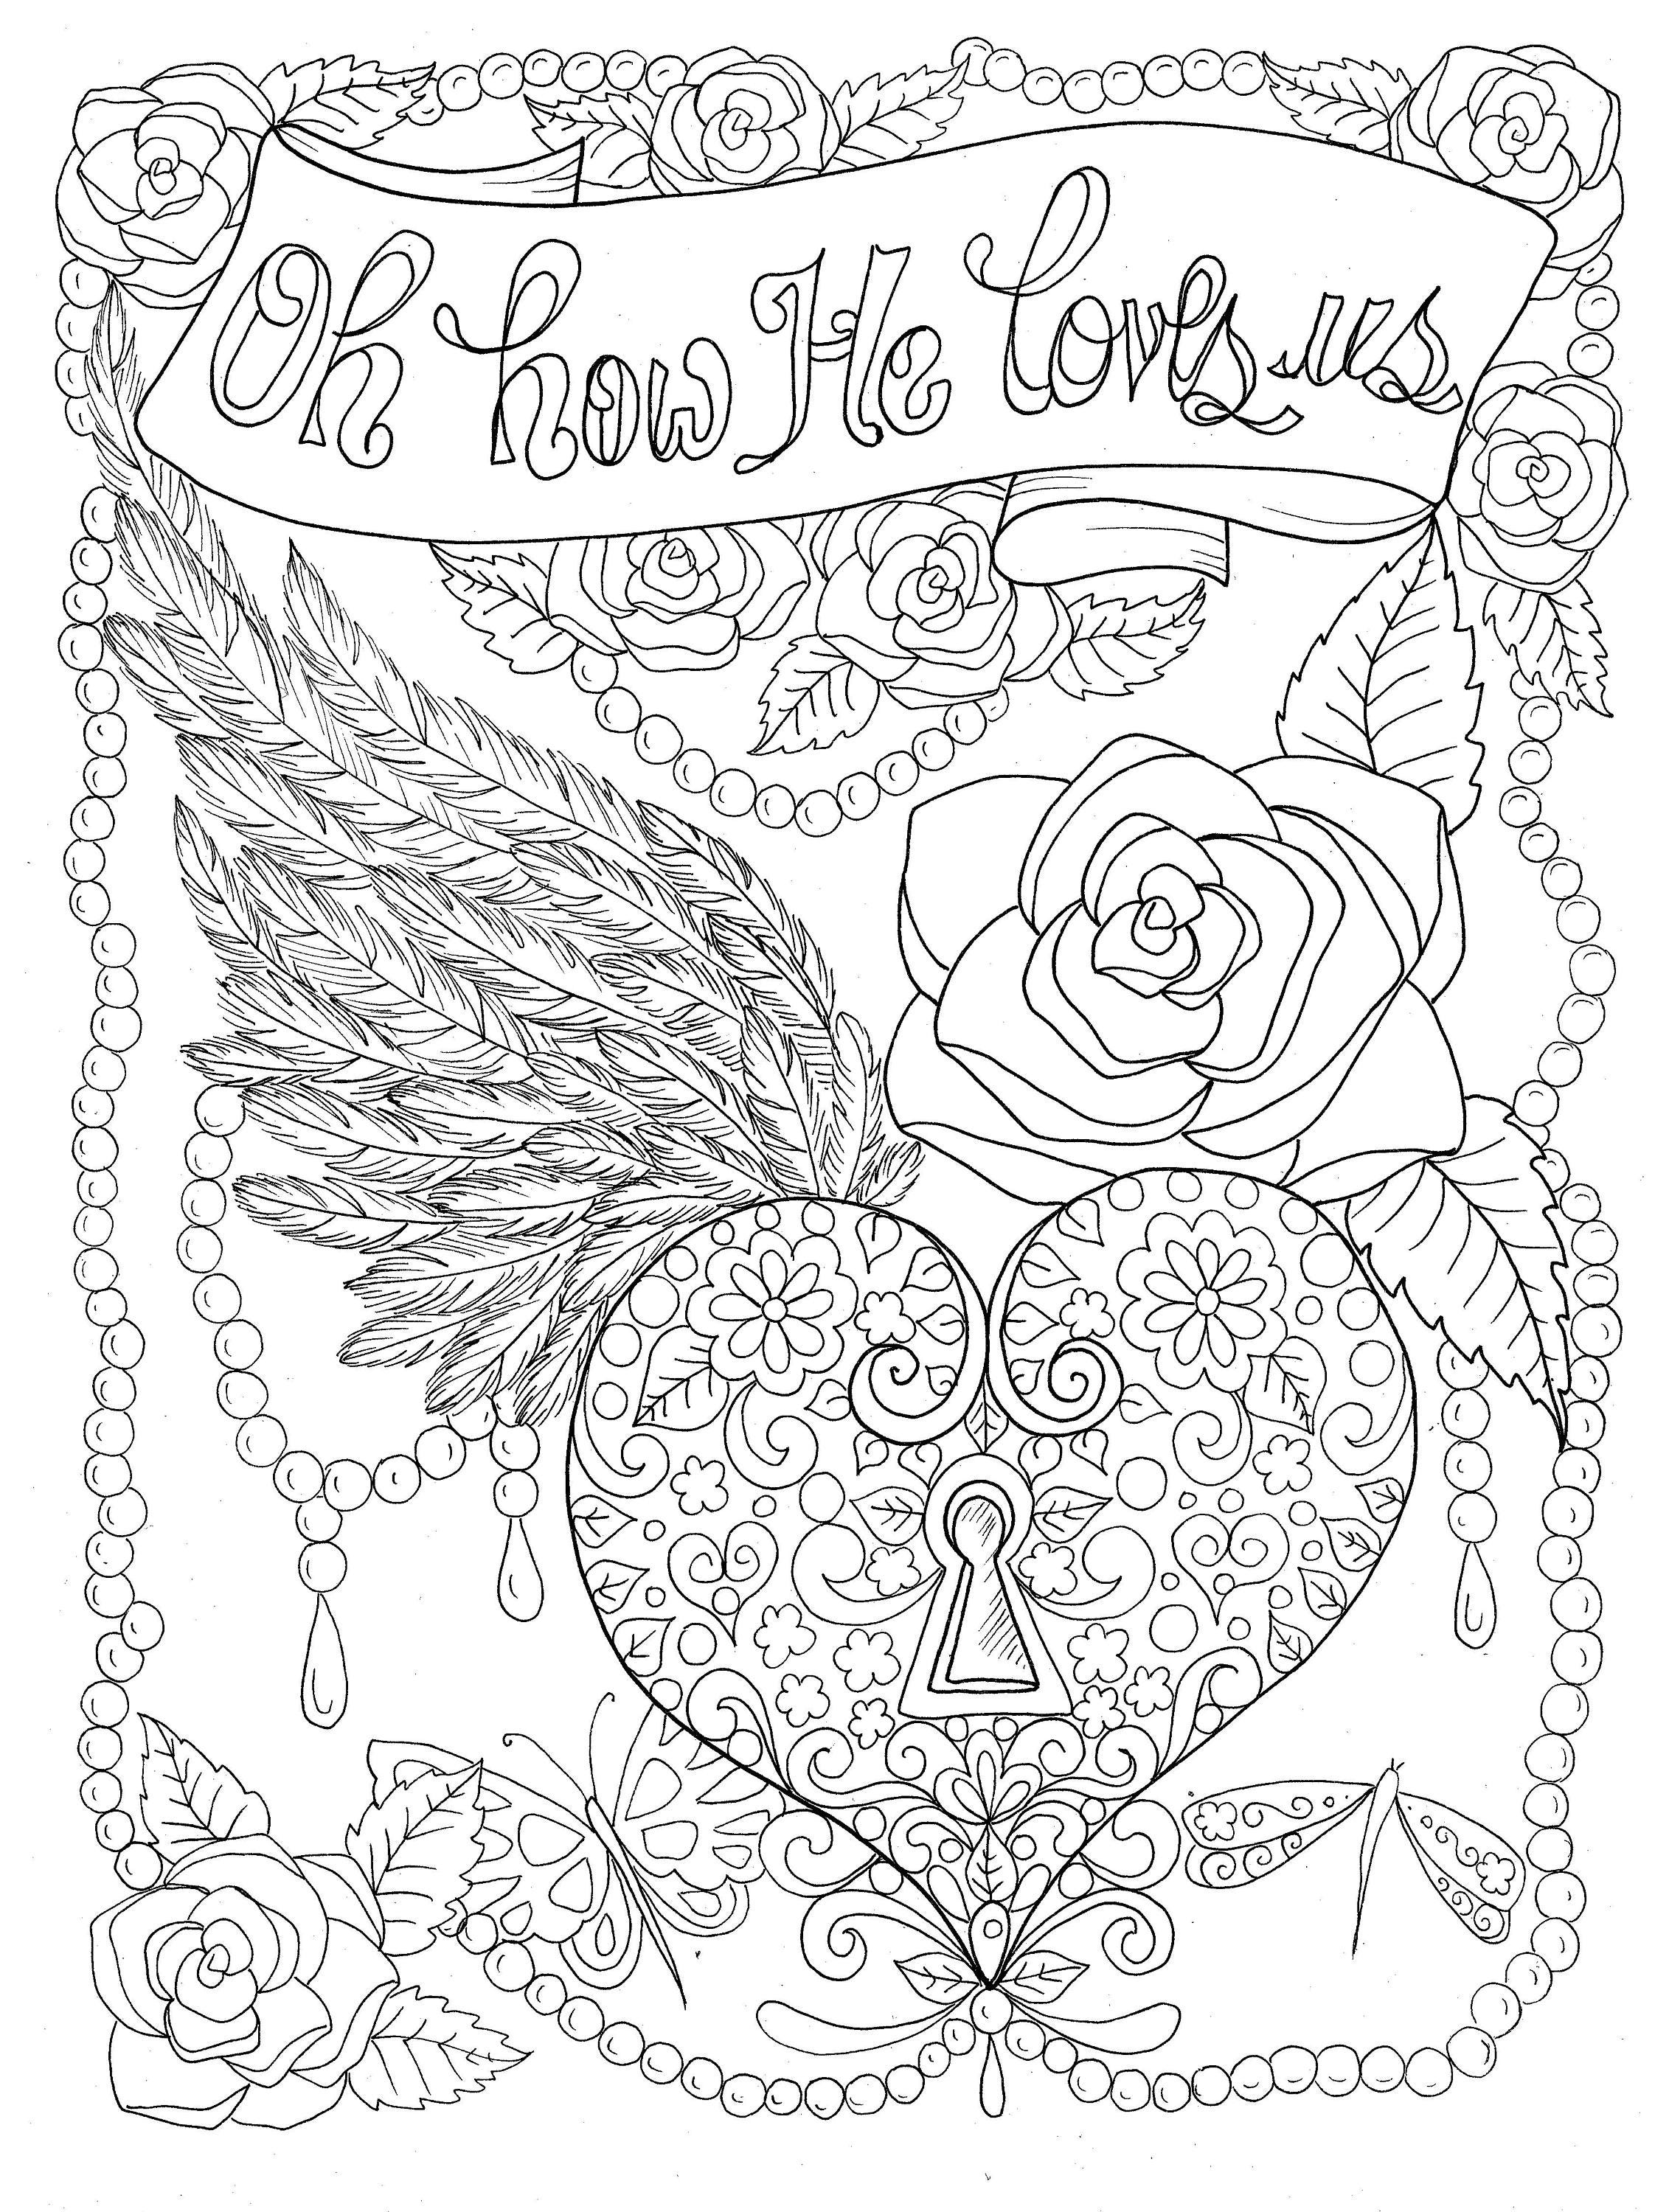 Christian Worship coloring page Instant download/church/